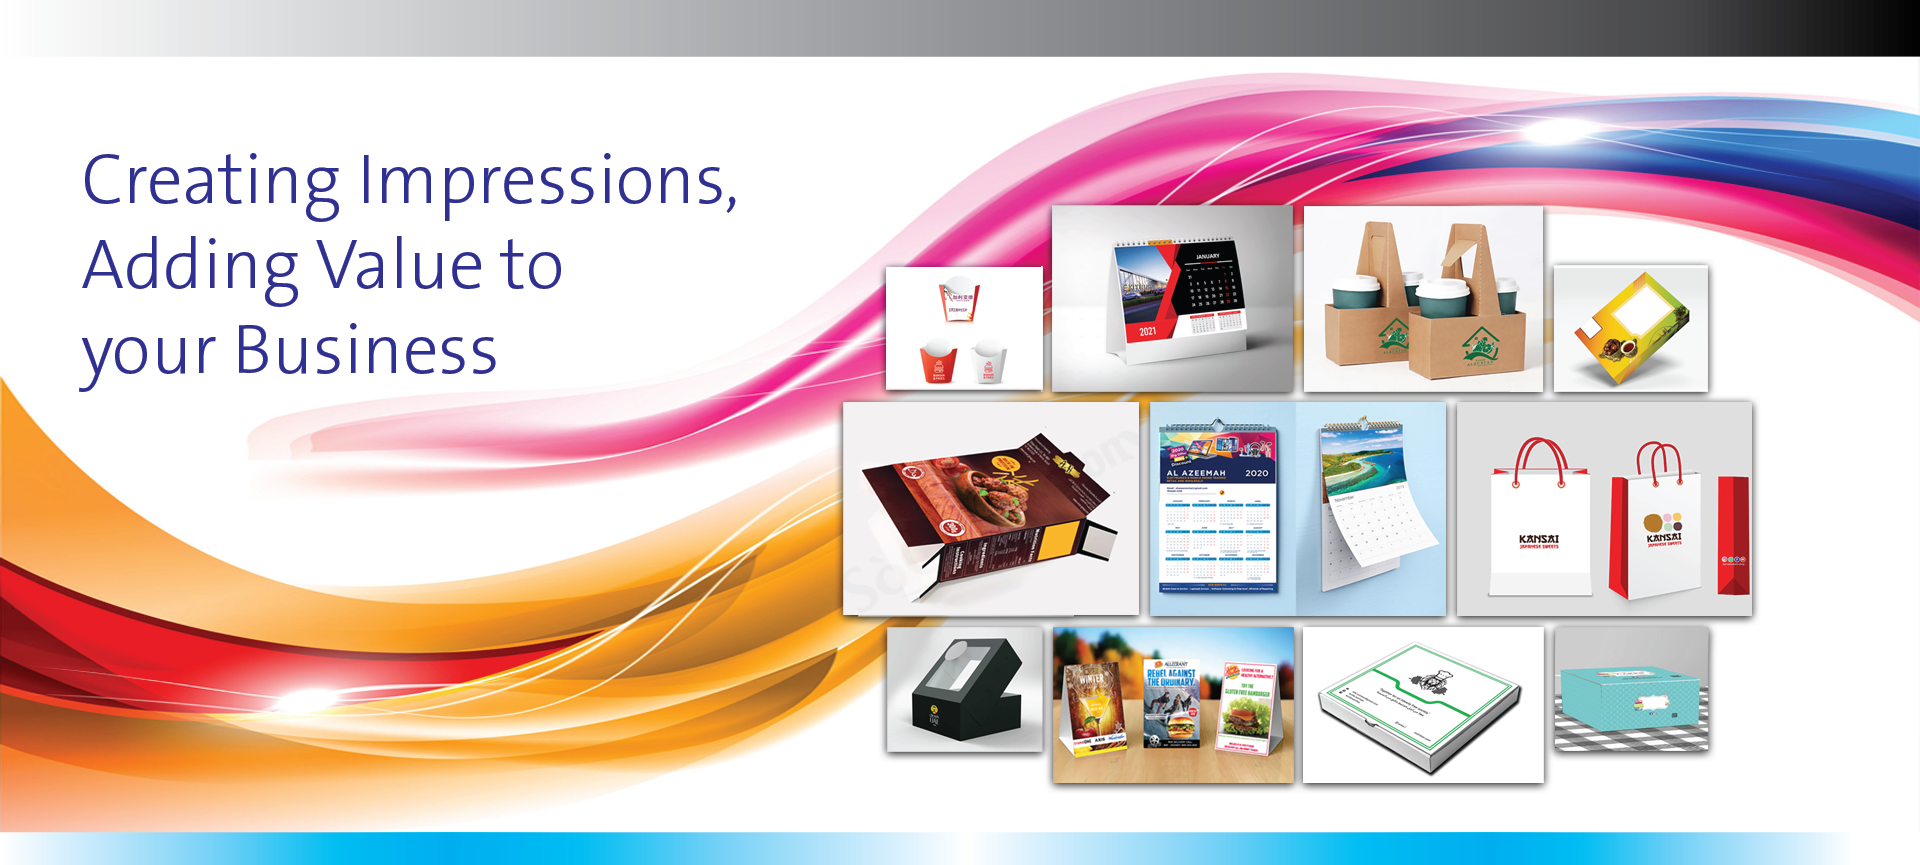 Printing Services In Dubai | Printing Services In UAE